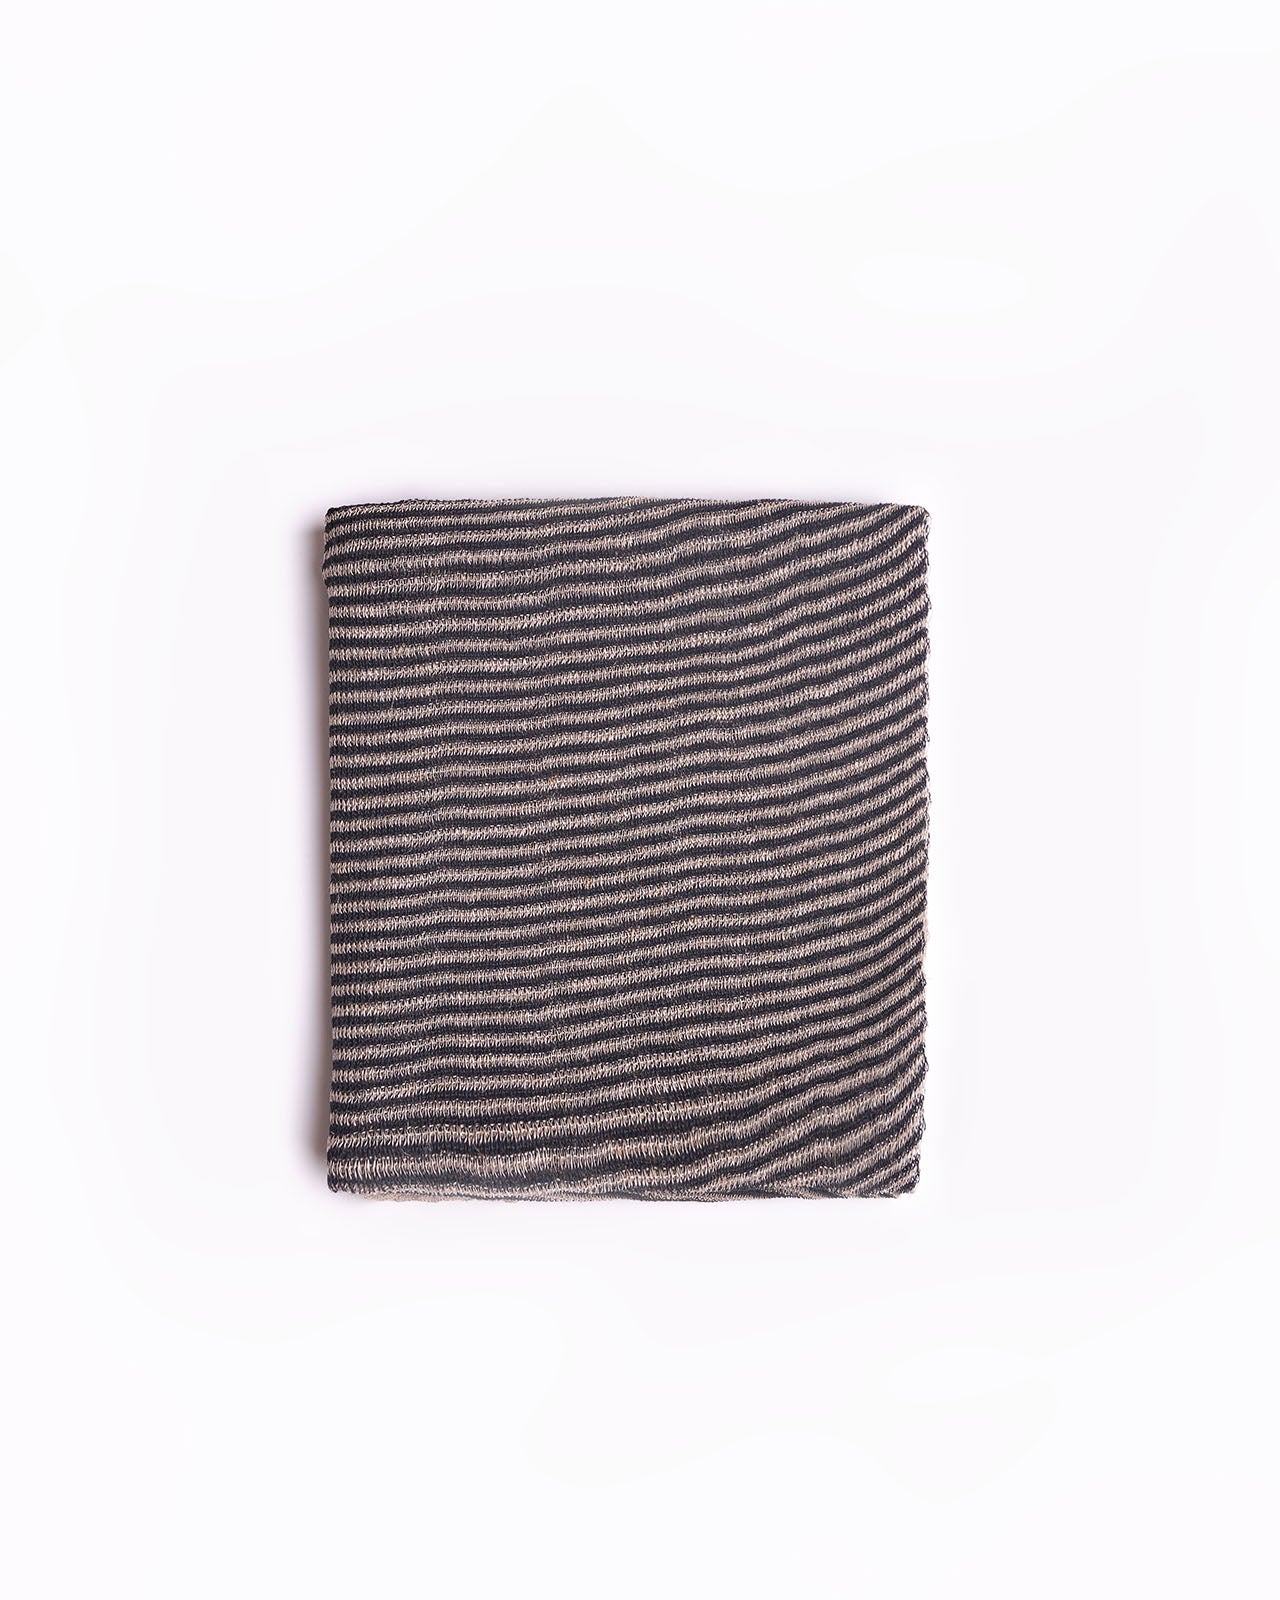 High-quality black linen striped scarf folded neatly against a clean white background. This scarf features a classic striped design in shades of beige, ideal for adding a touch of elegance to any outfit. The soft fabric and neutral tones make it a versatile accessory for both casual and formal occasions. Perfect for those searching for timeless fashion pieces